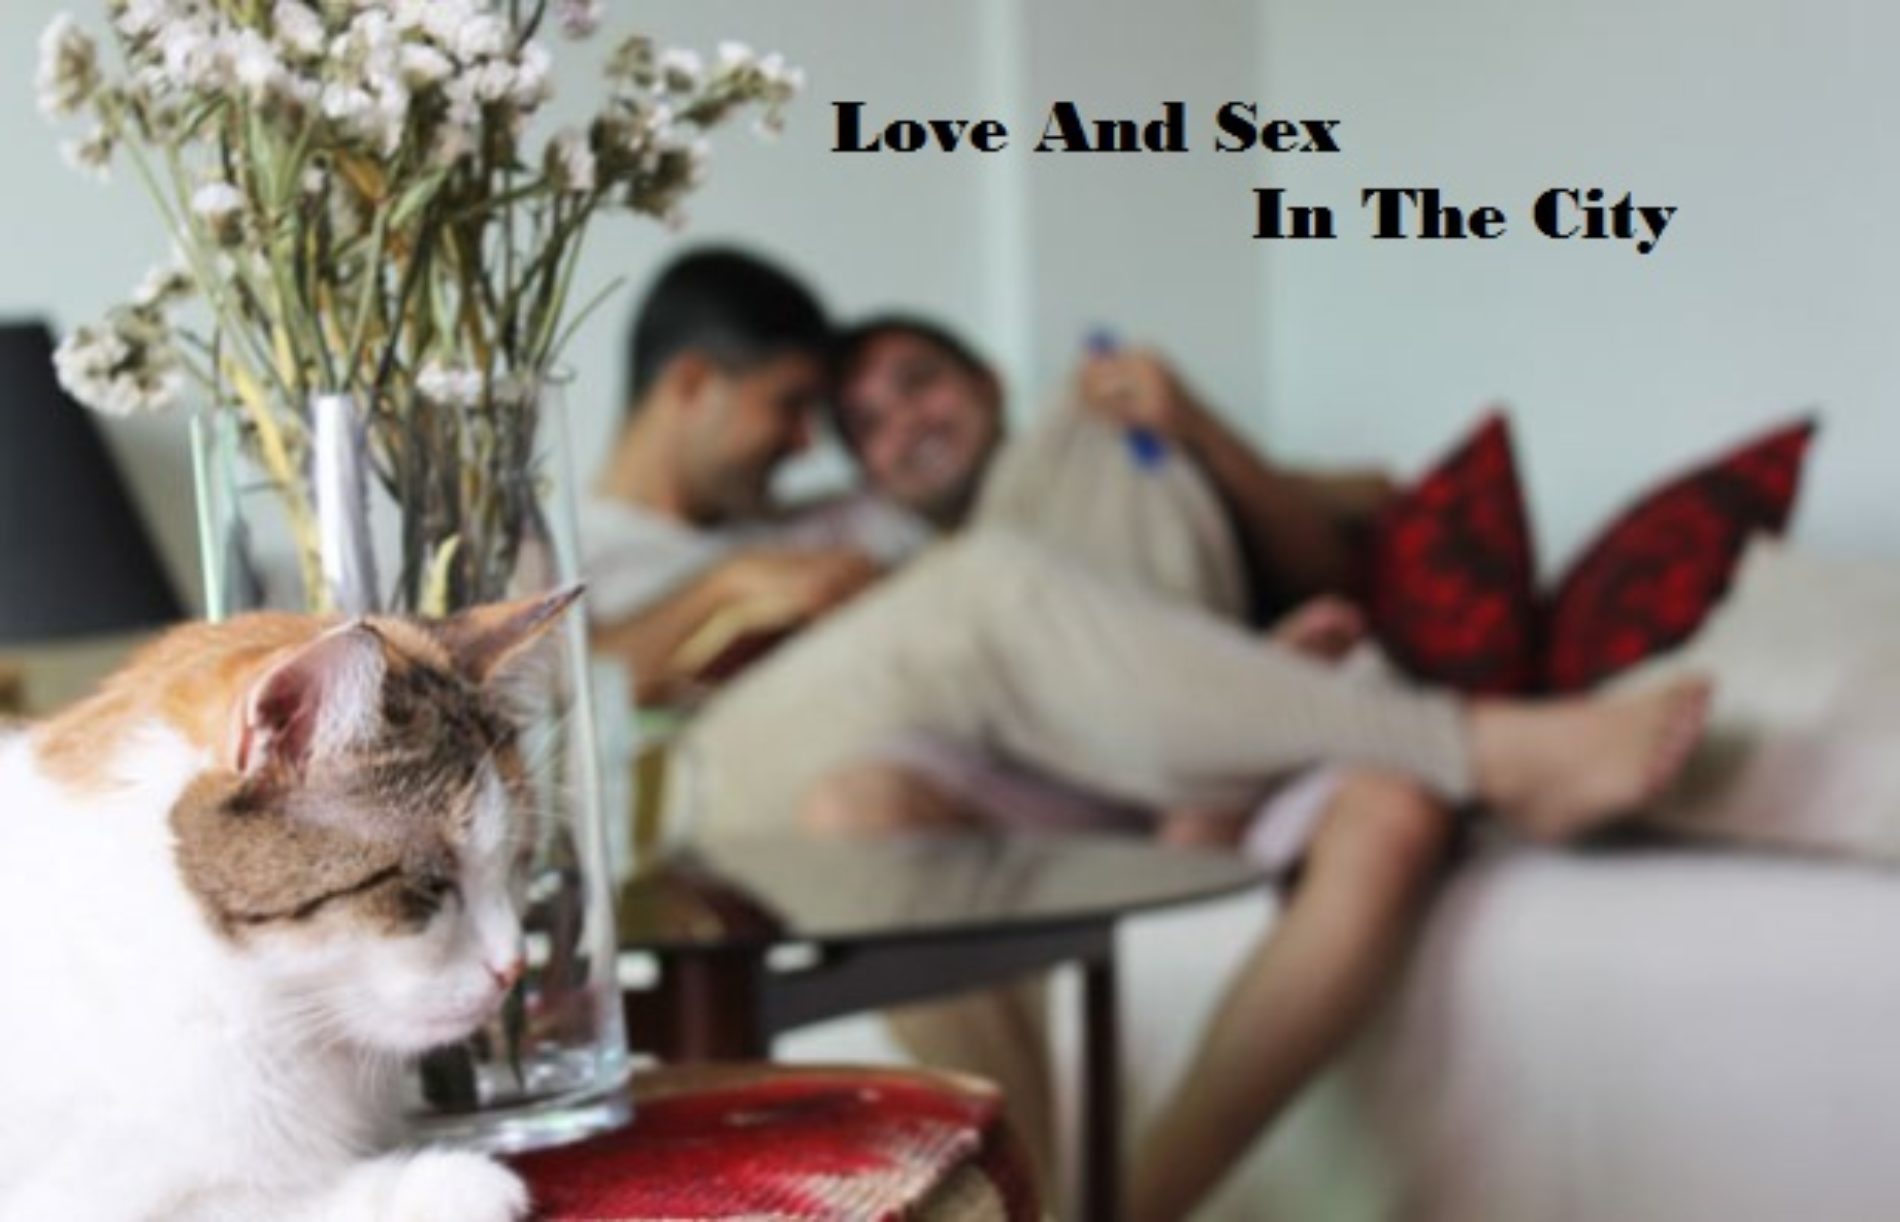 LOVE AND SEX IN THE CITY (Episode 55)